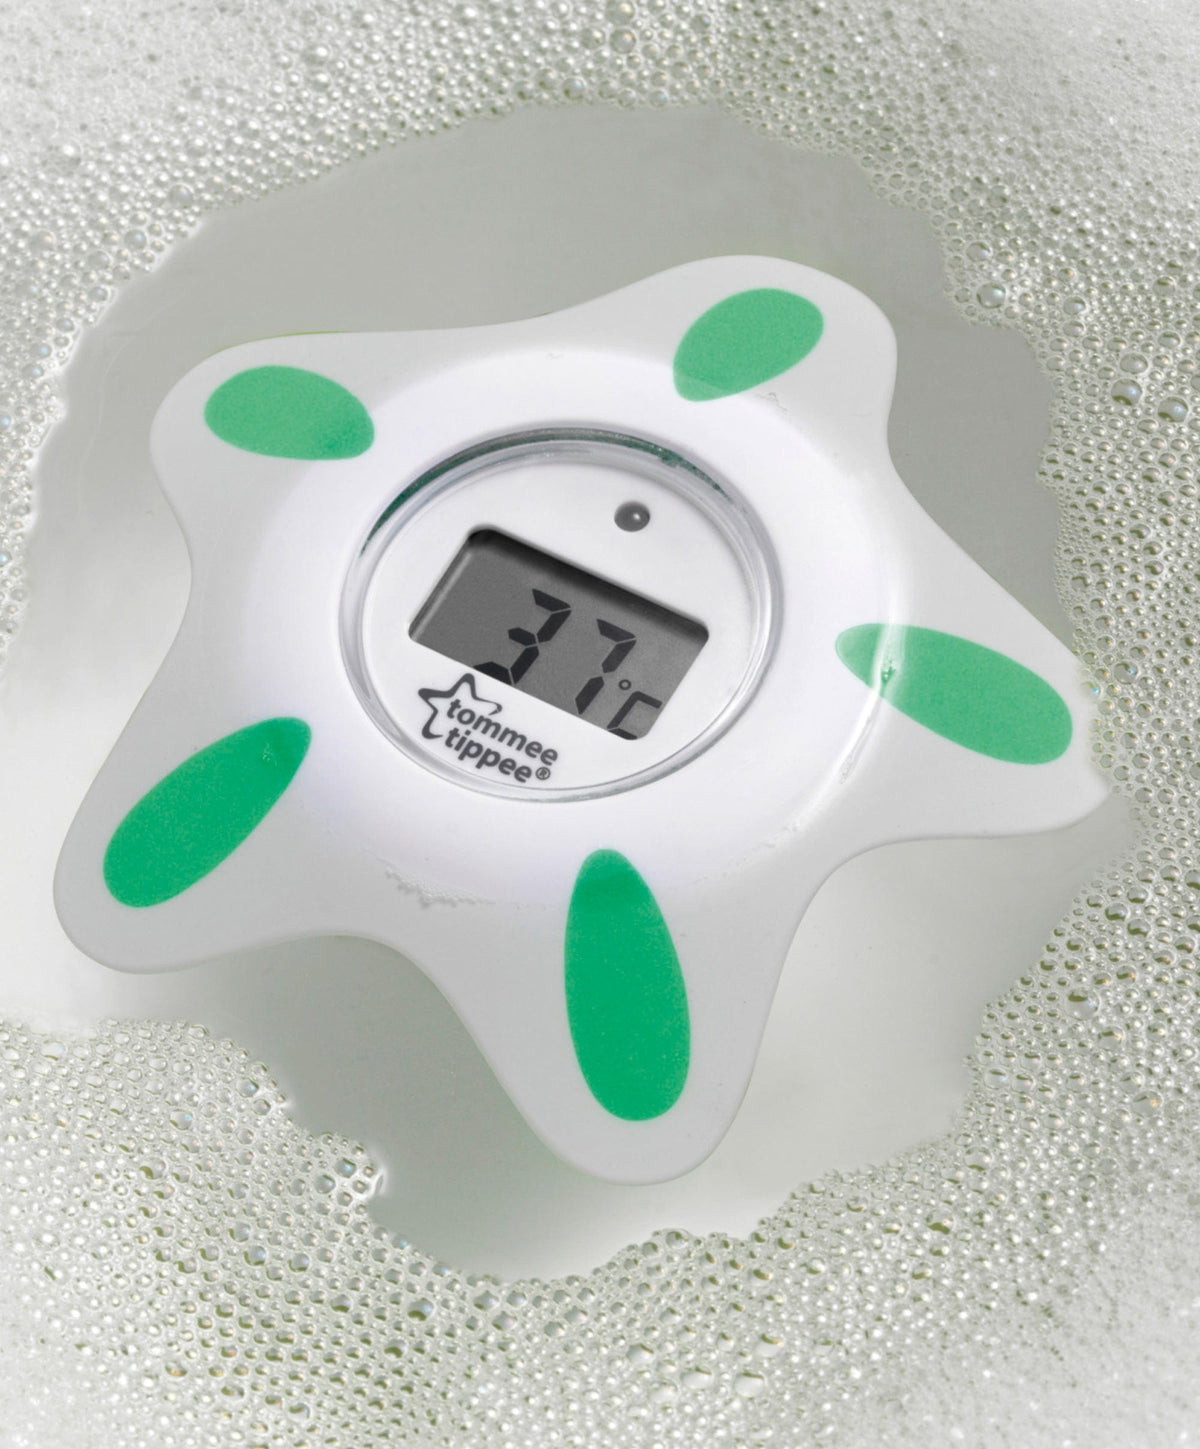 Tommee Tippee Closer to Nature In-Bath Digital Bath & Room